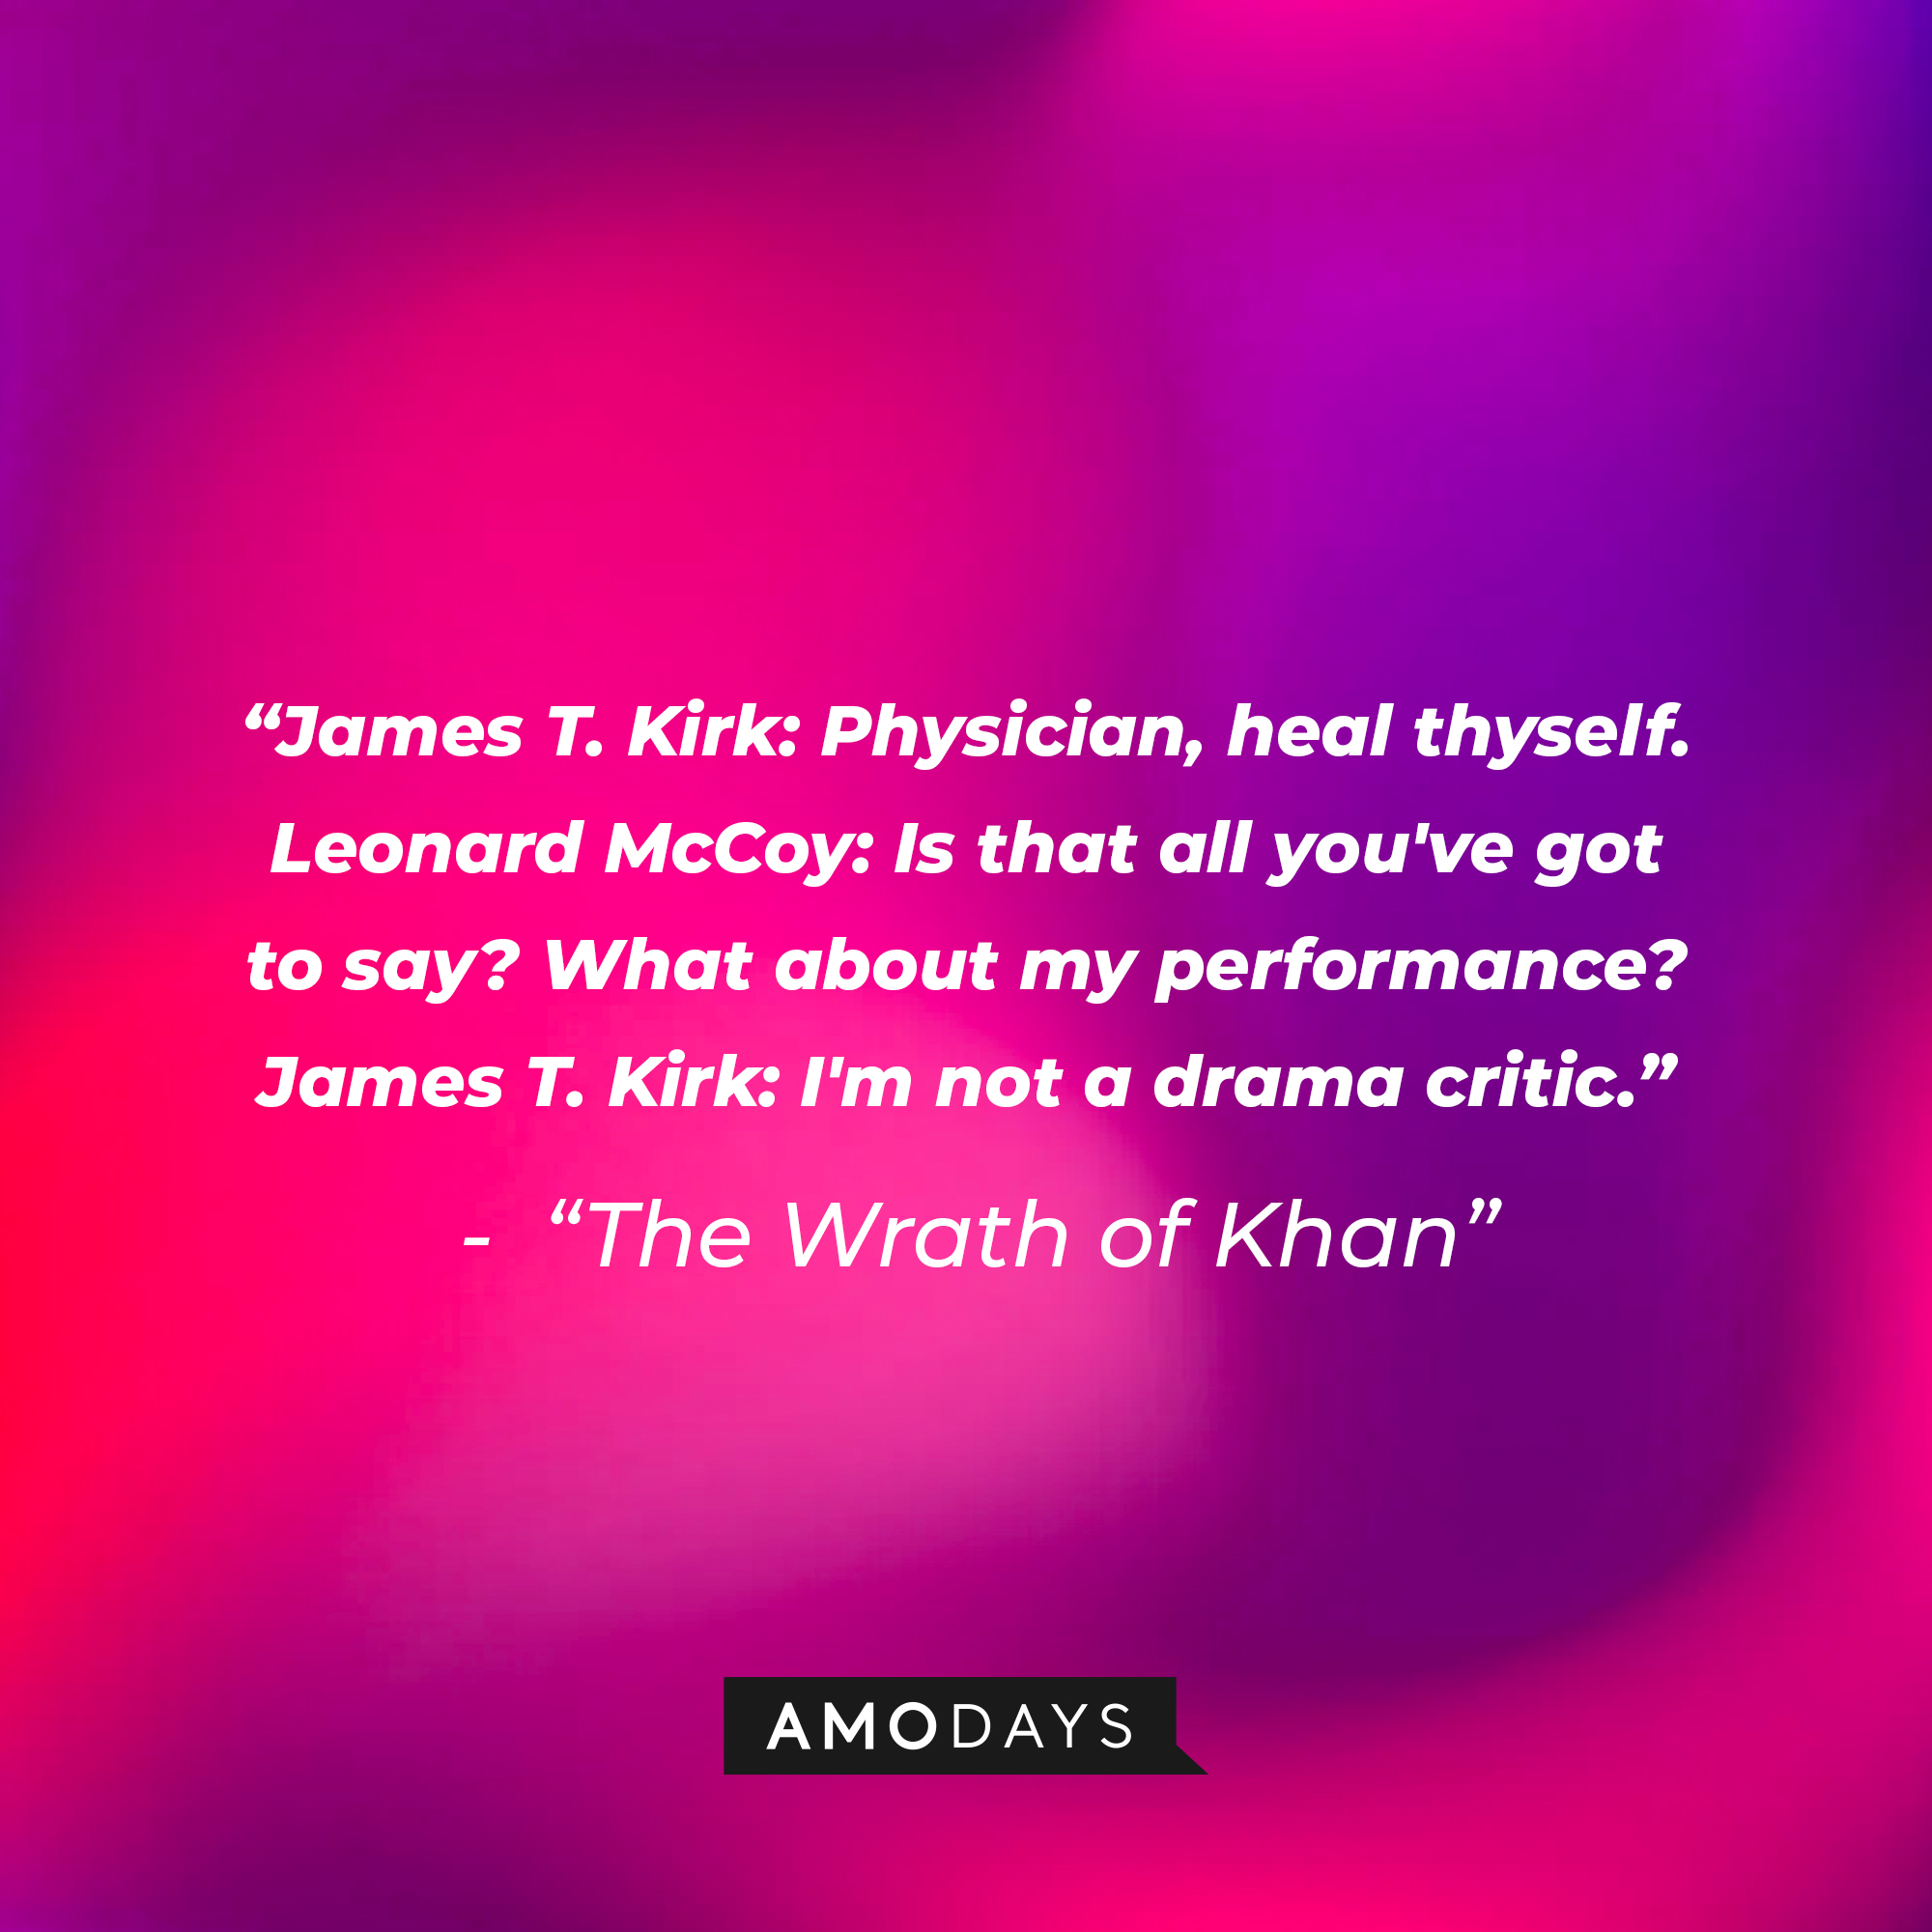 A photo with the dialogue, "James T. Kirk: Physician, heal thyself. Leonard McCoy: Is that all you've got to say? What about my performance? James T. Kirk: I'm not a drama critic." | Source: Amodays